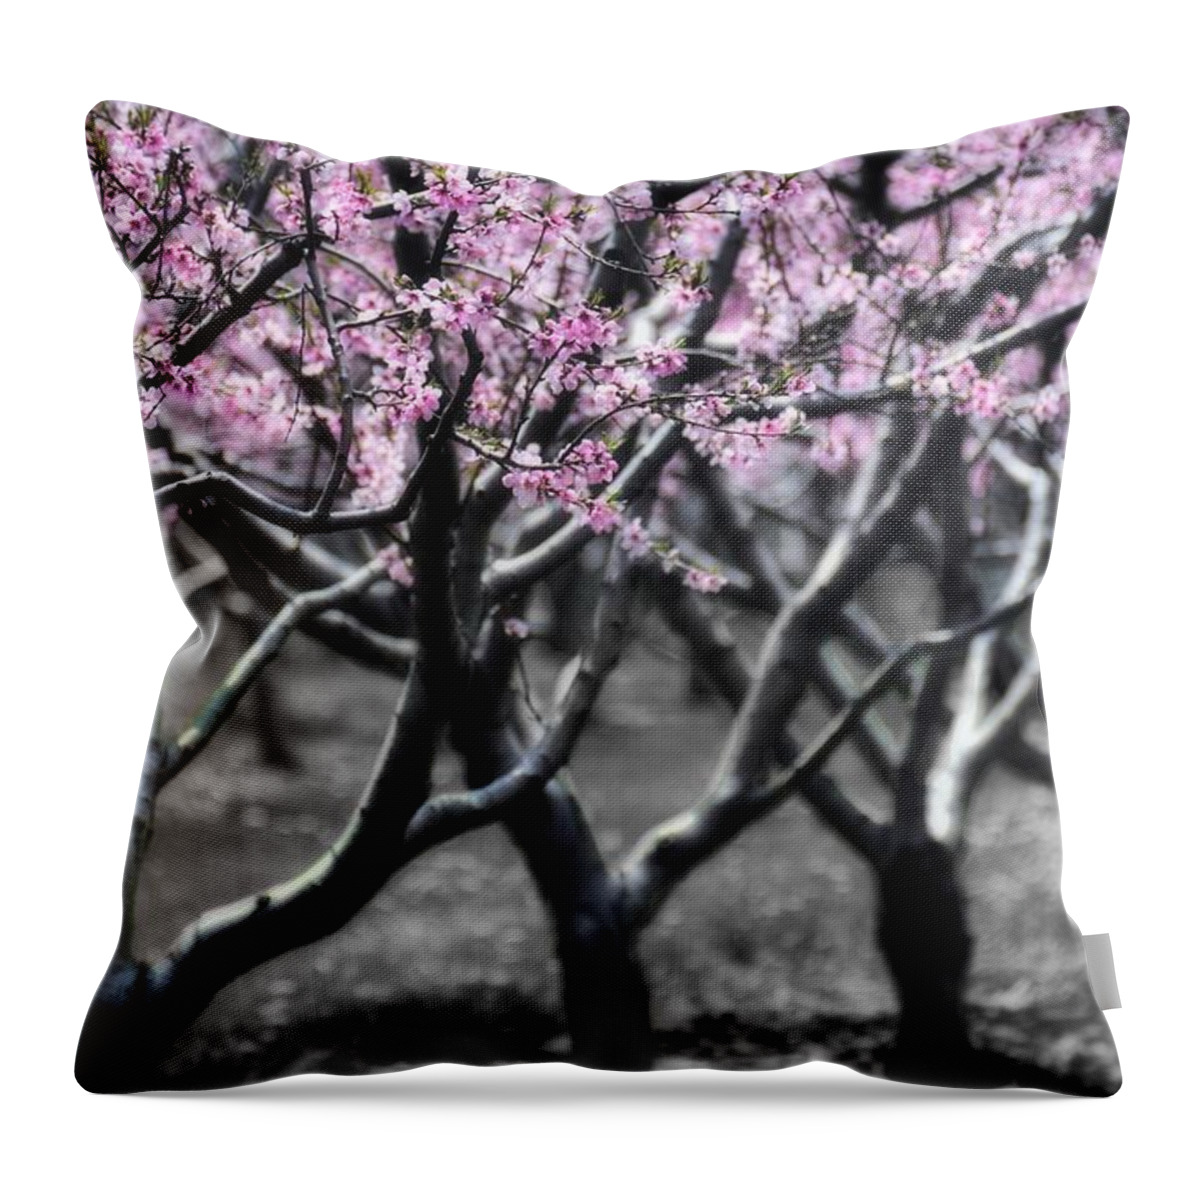 Tree Throw Pillow featuring the photograph Cotton Candy by Henry Kowalski